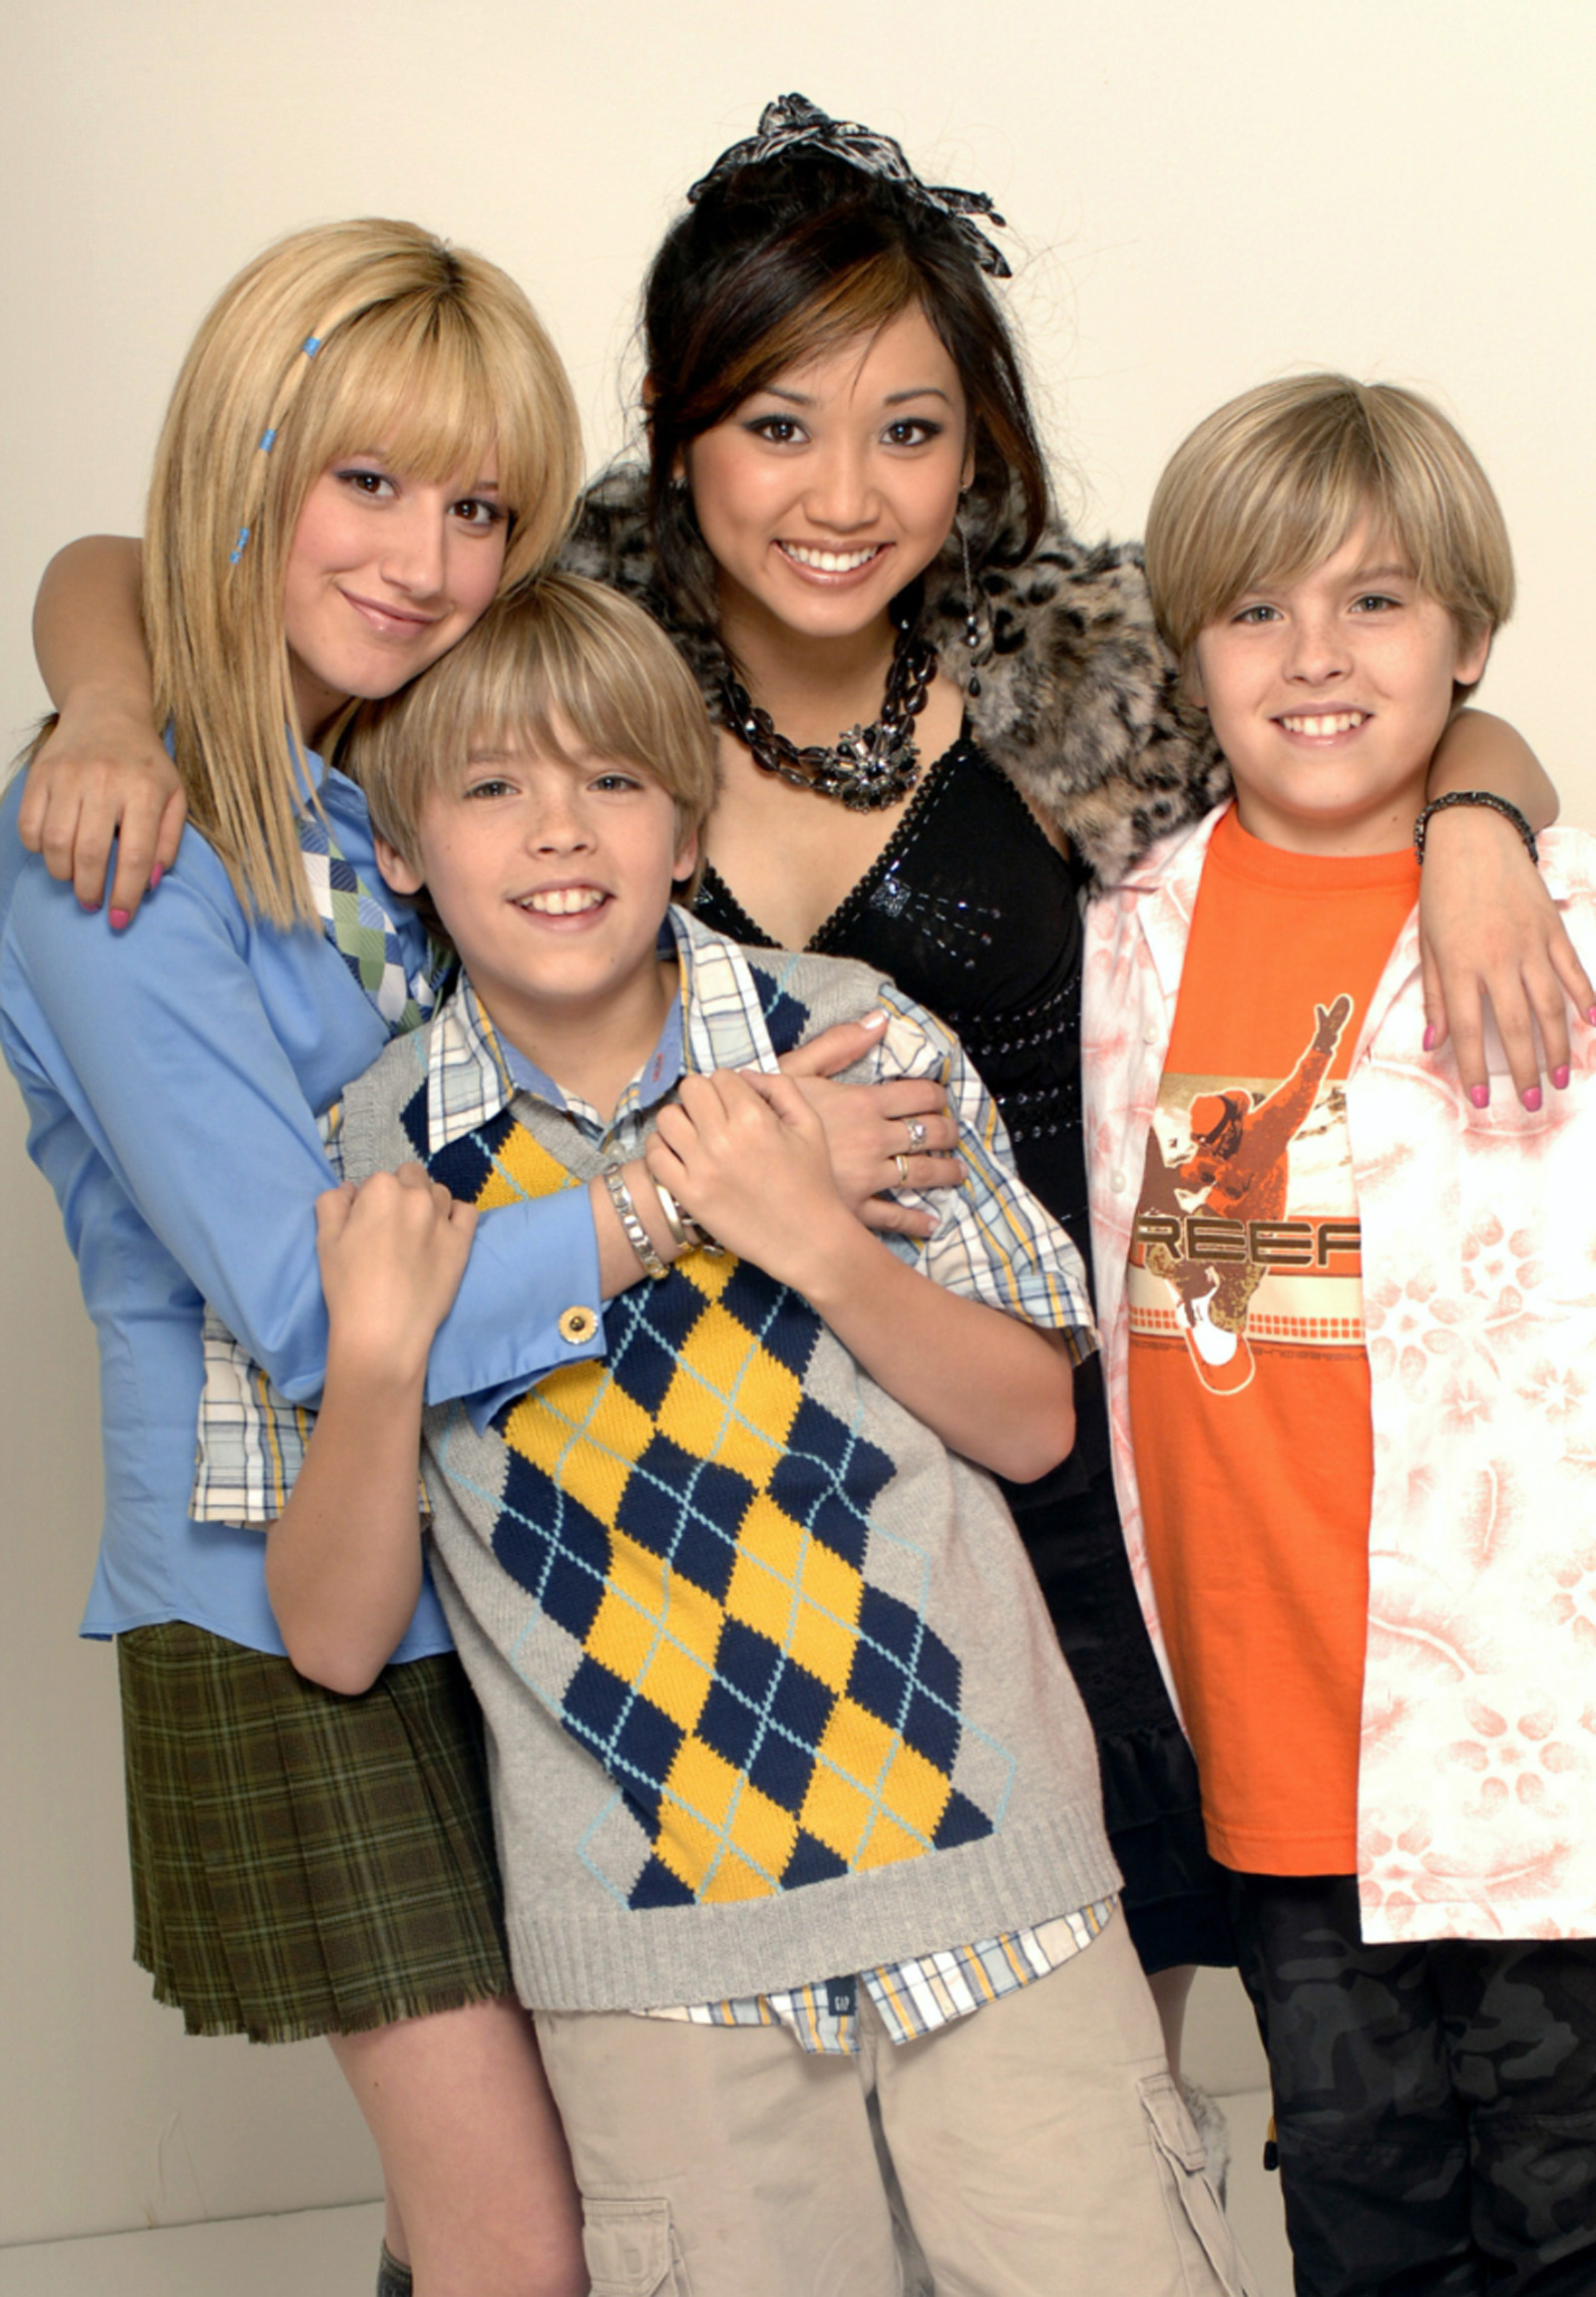 Cole Sprouse in The Suite Life of Zack and Cody (Season 1)